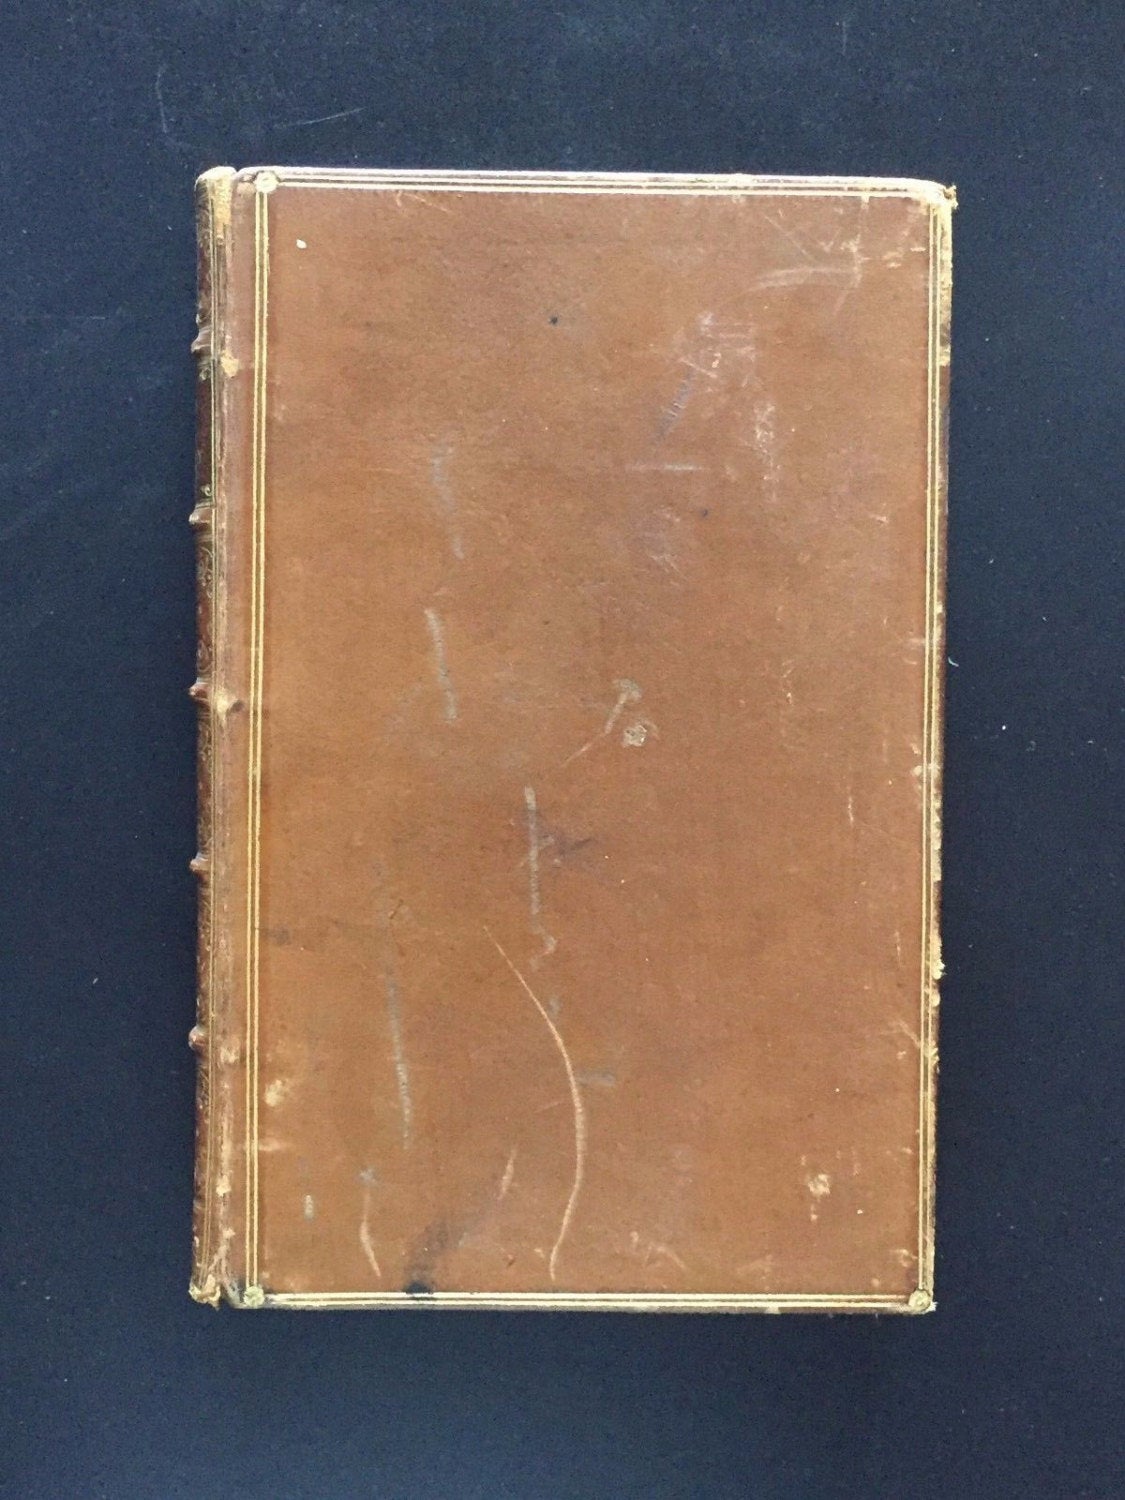 Poems of Shelley, Arranged by Stopford A. Brooke, Leather, 1902